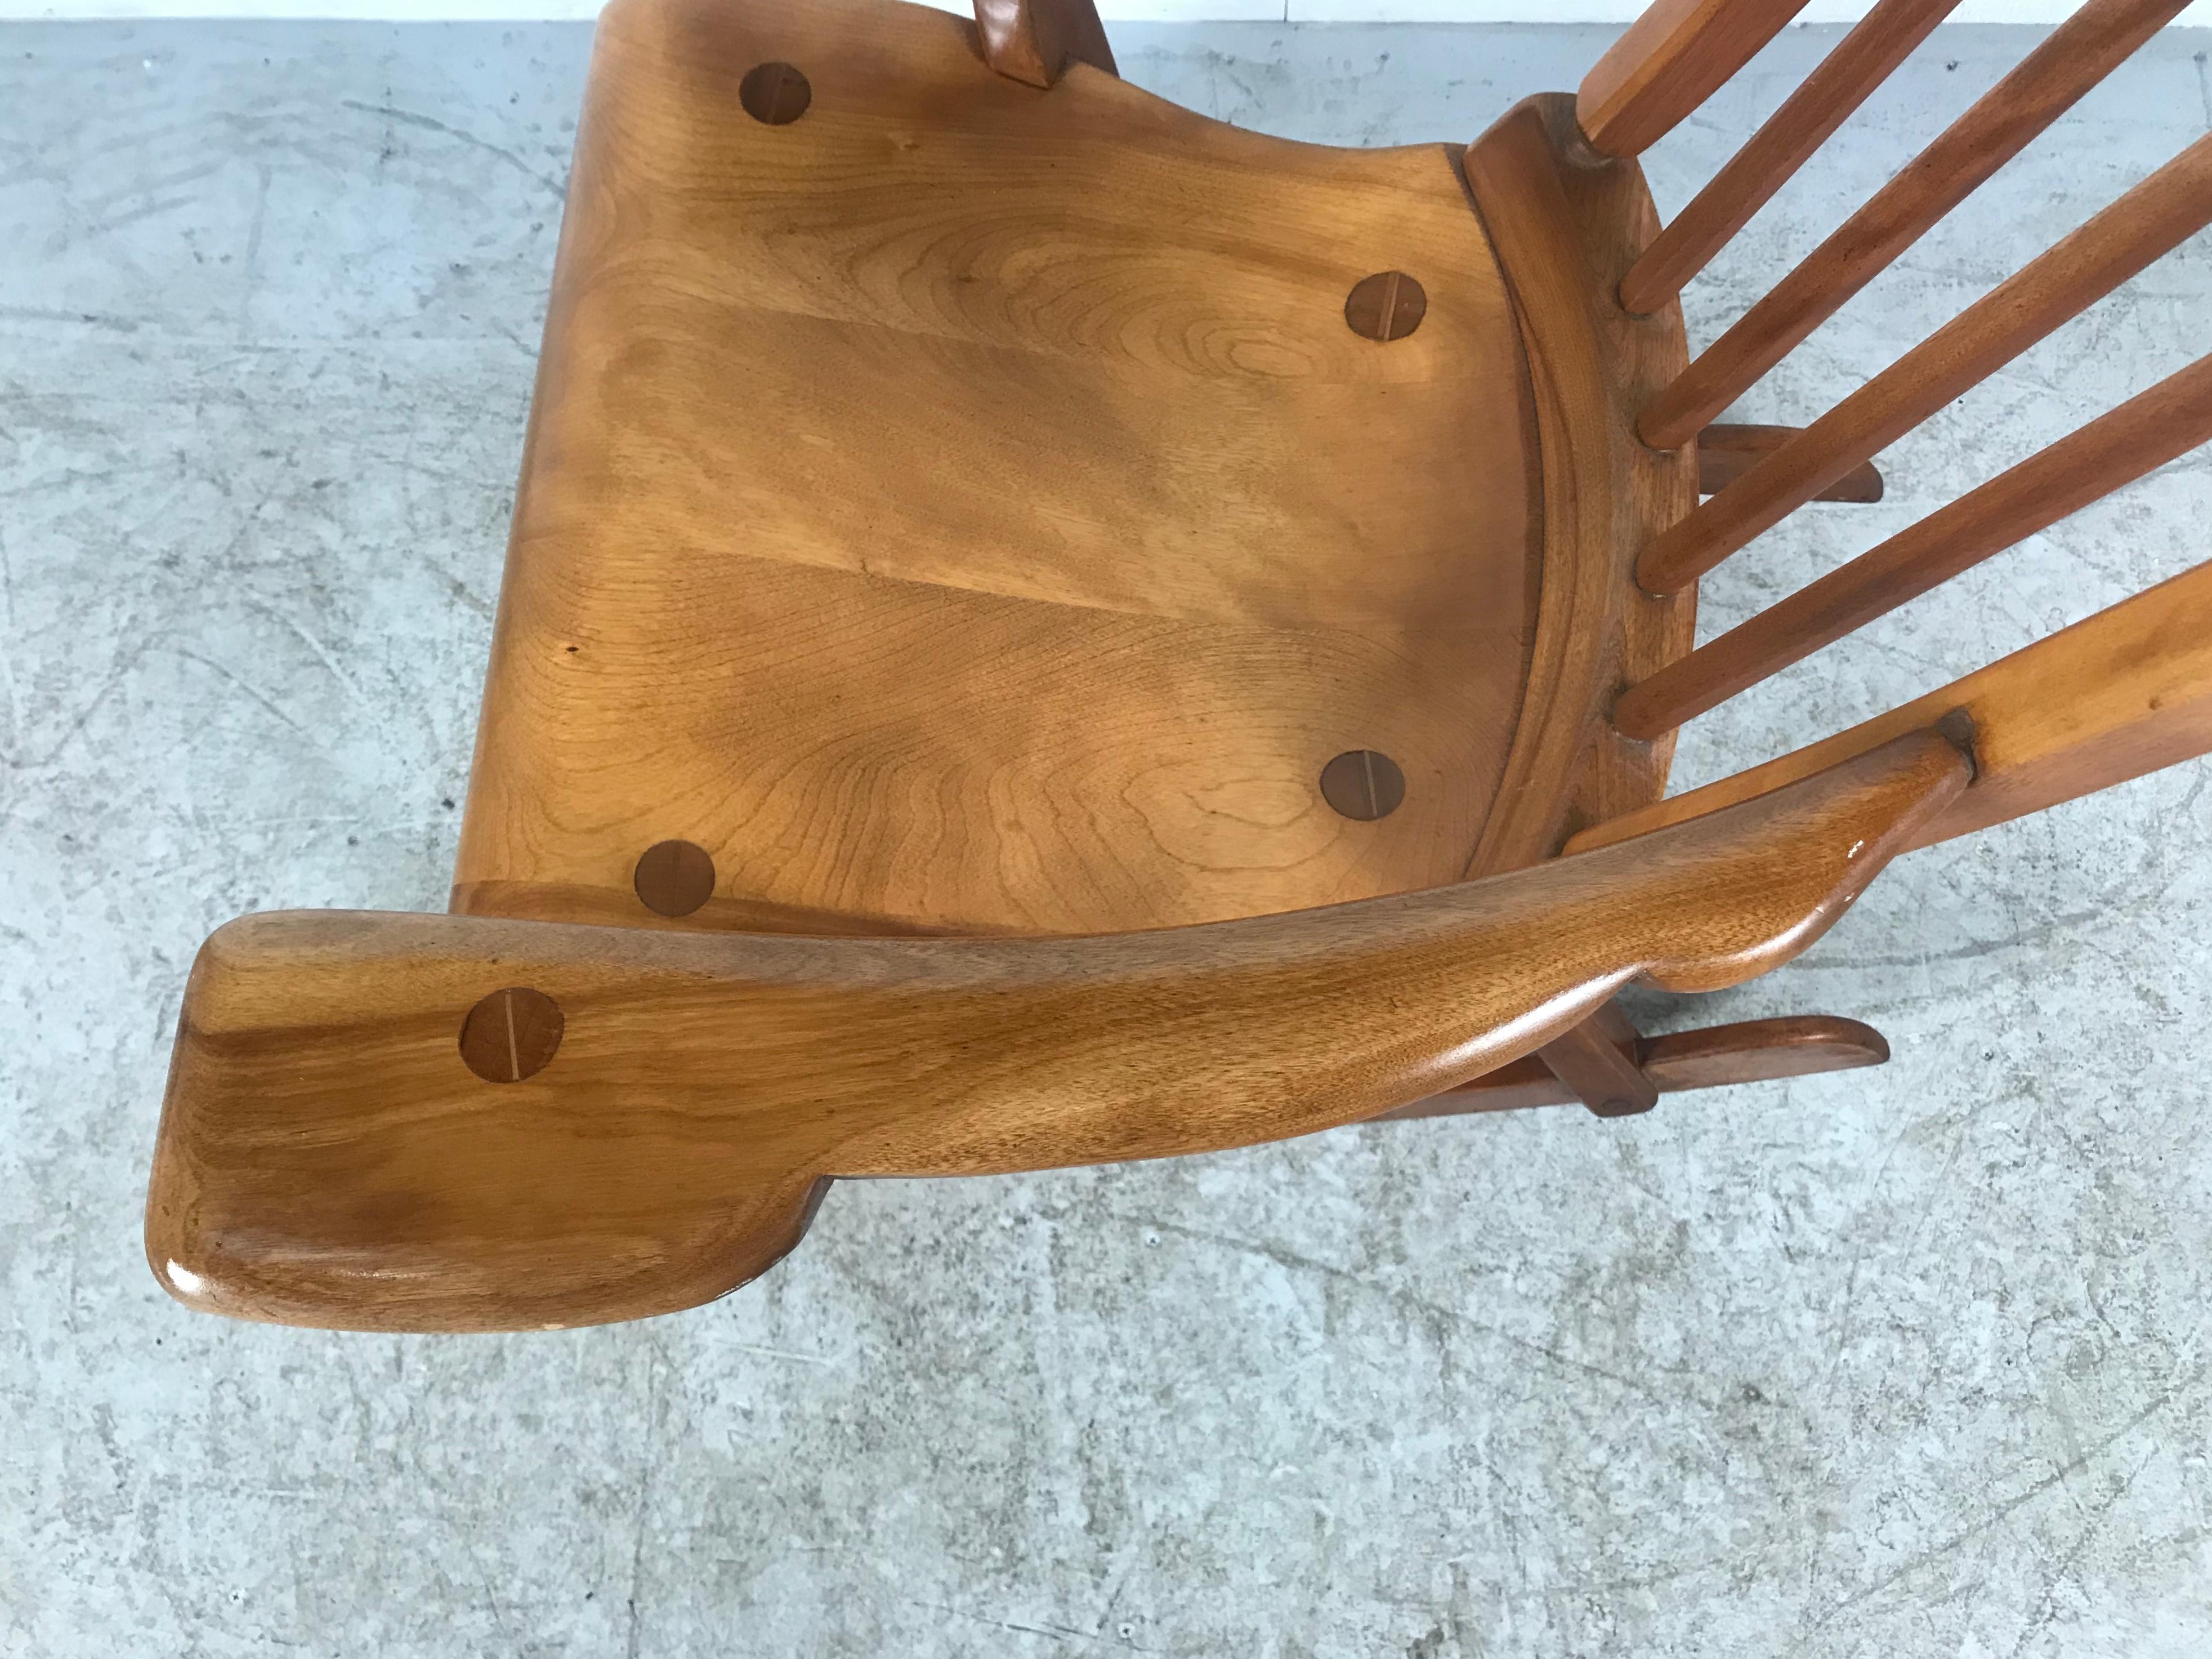 Mid-20th Century American Colonial Modernist Solid Maple Rocking Chair, Attrib Sikes Chair Co